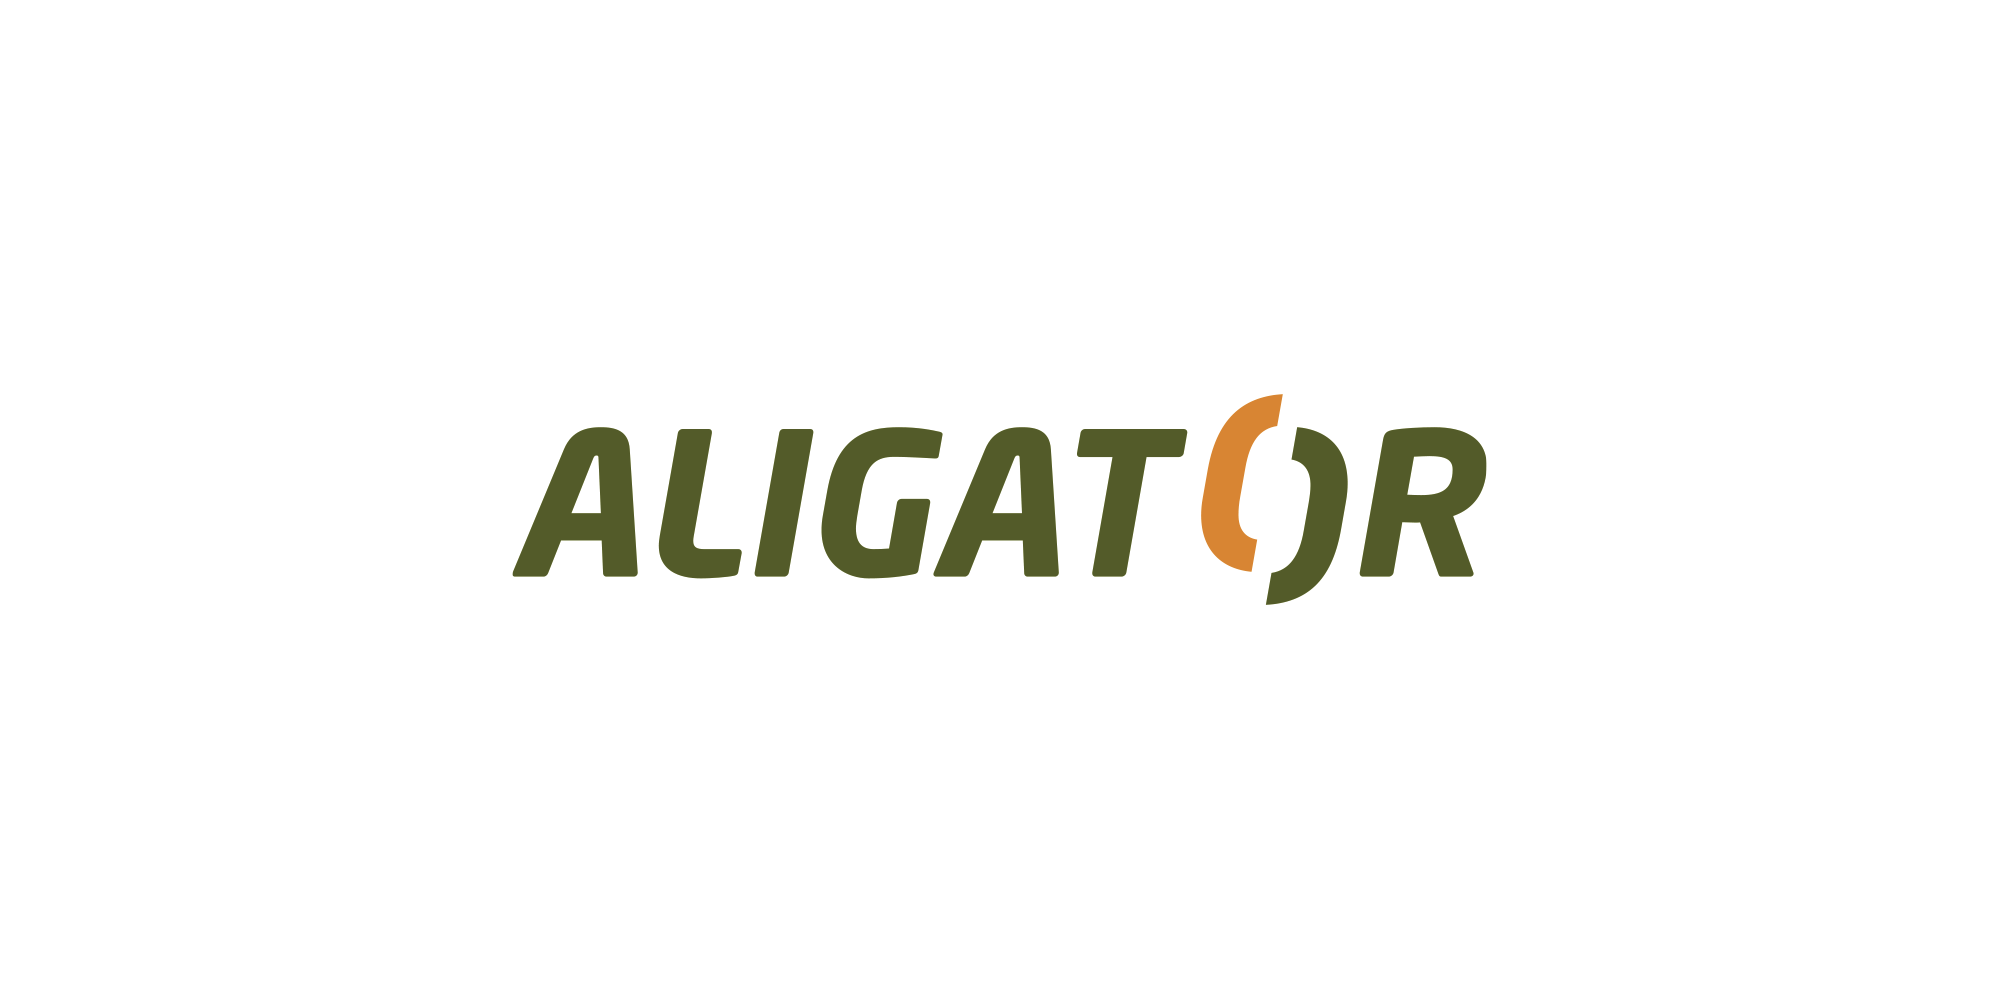 [album/Products_Model_Product/1/aligator-ci_2.png]